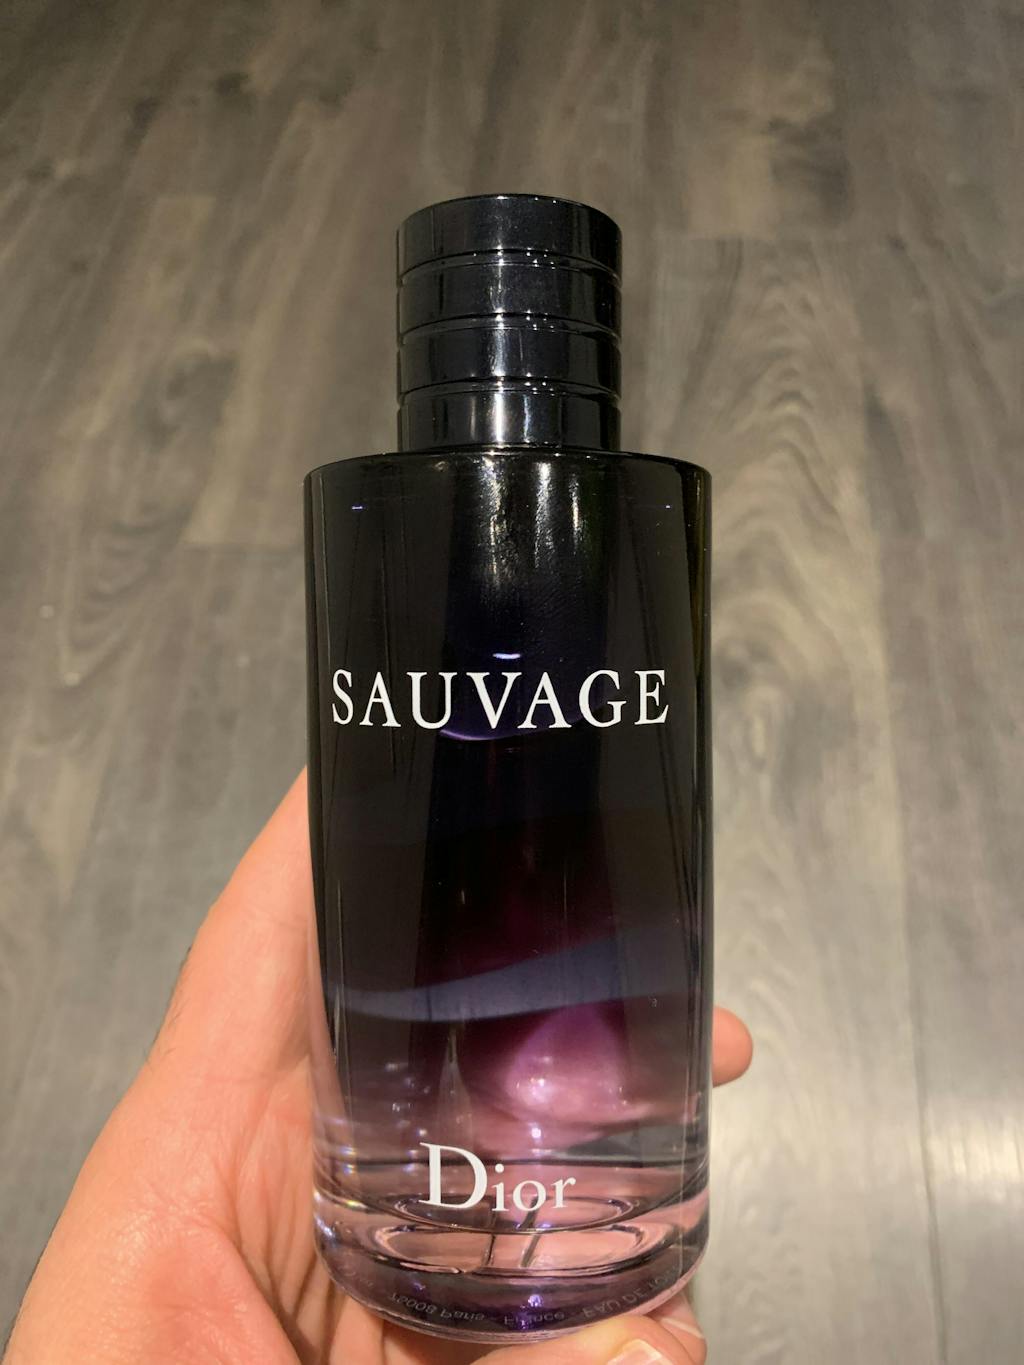 Dior Sauvage Edt Cologne for Men by Christian Dior in Canada ...